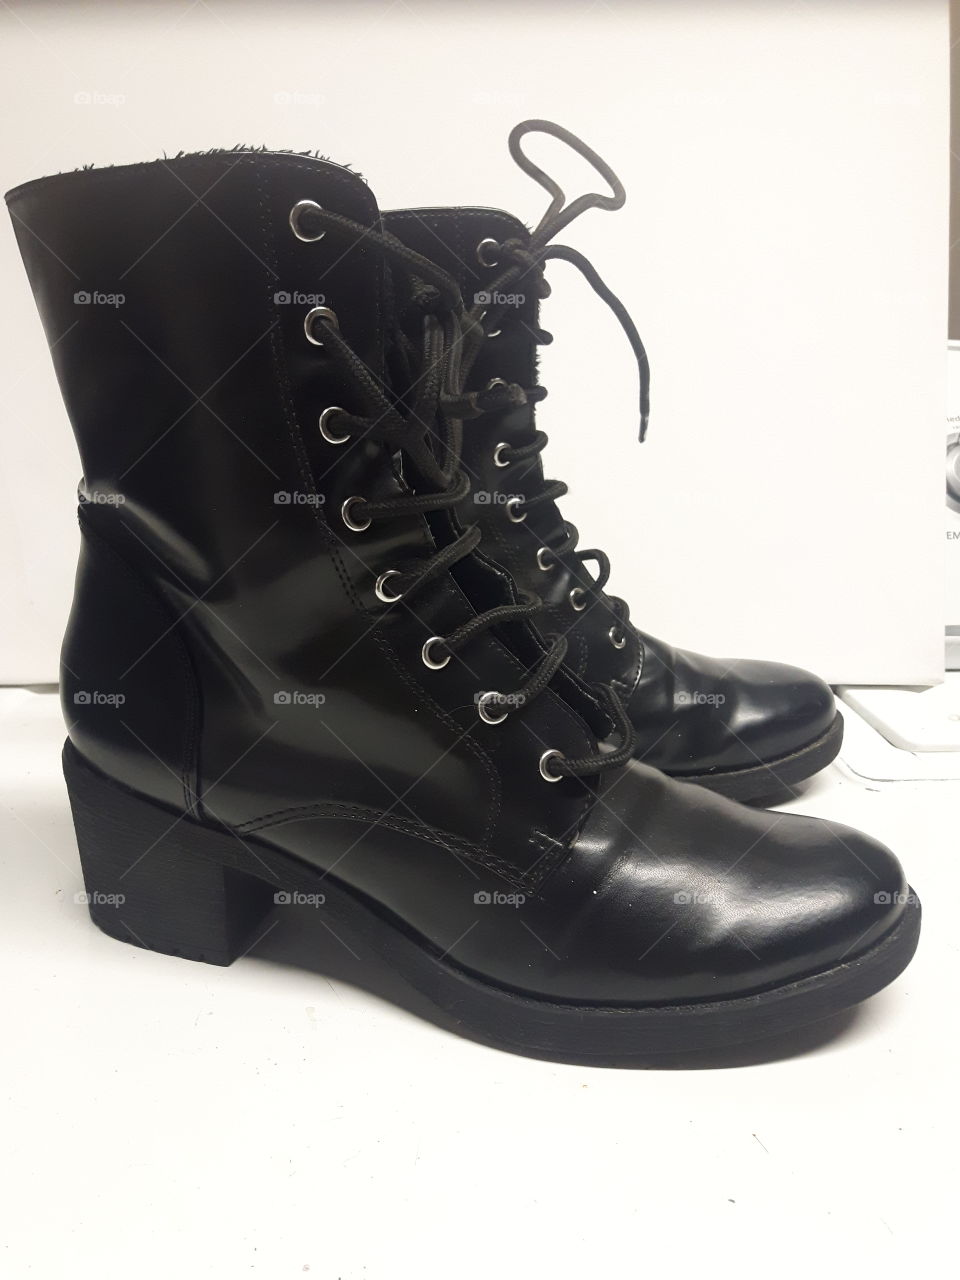 A pair of straight laced black patent leather boots that shine